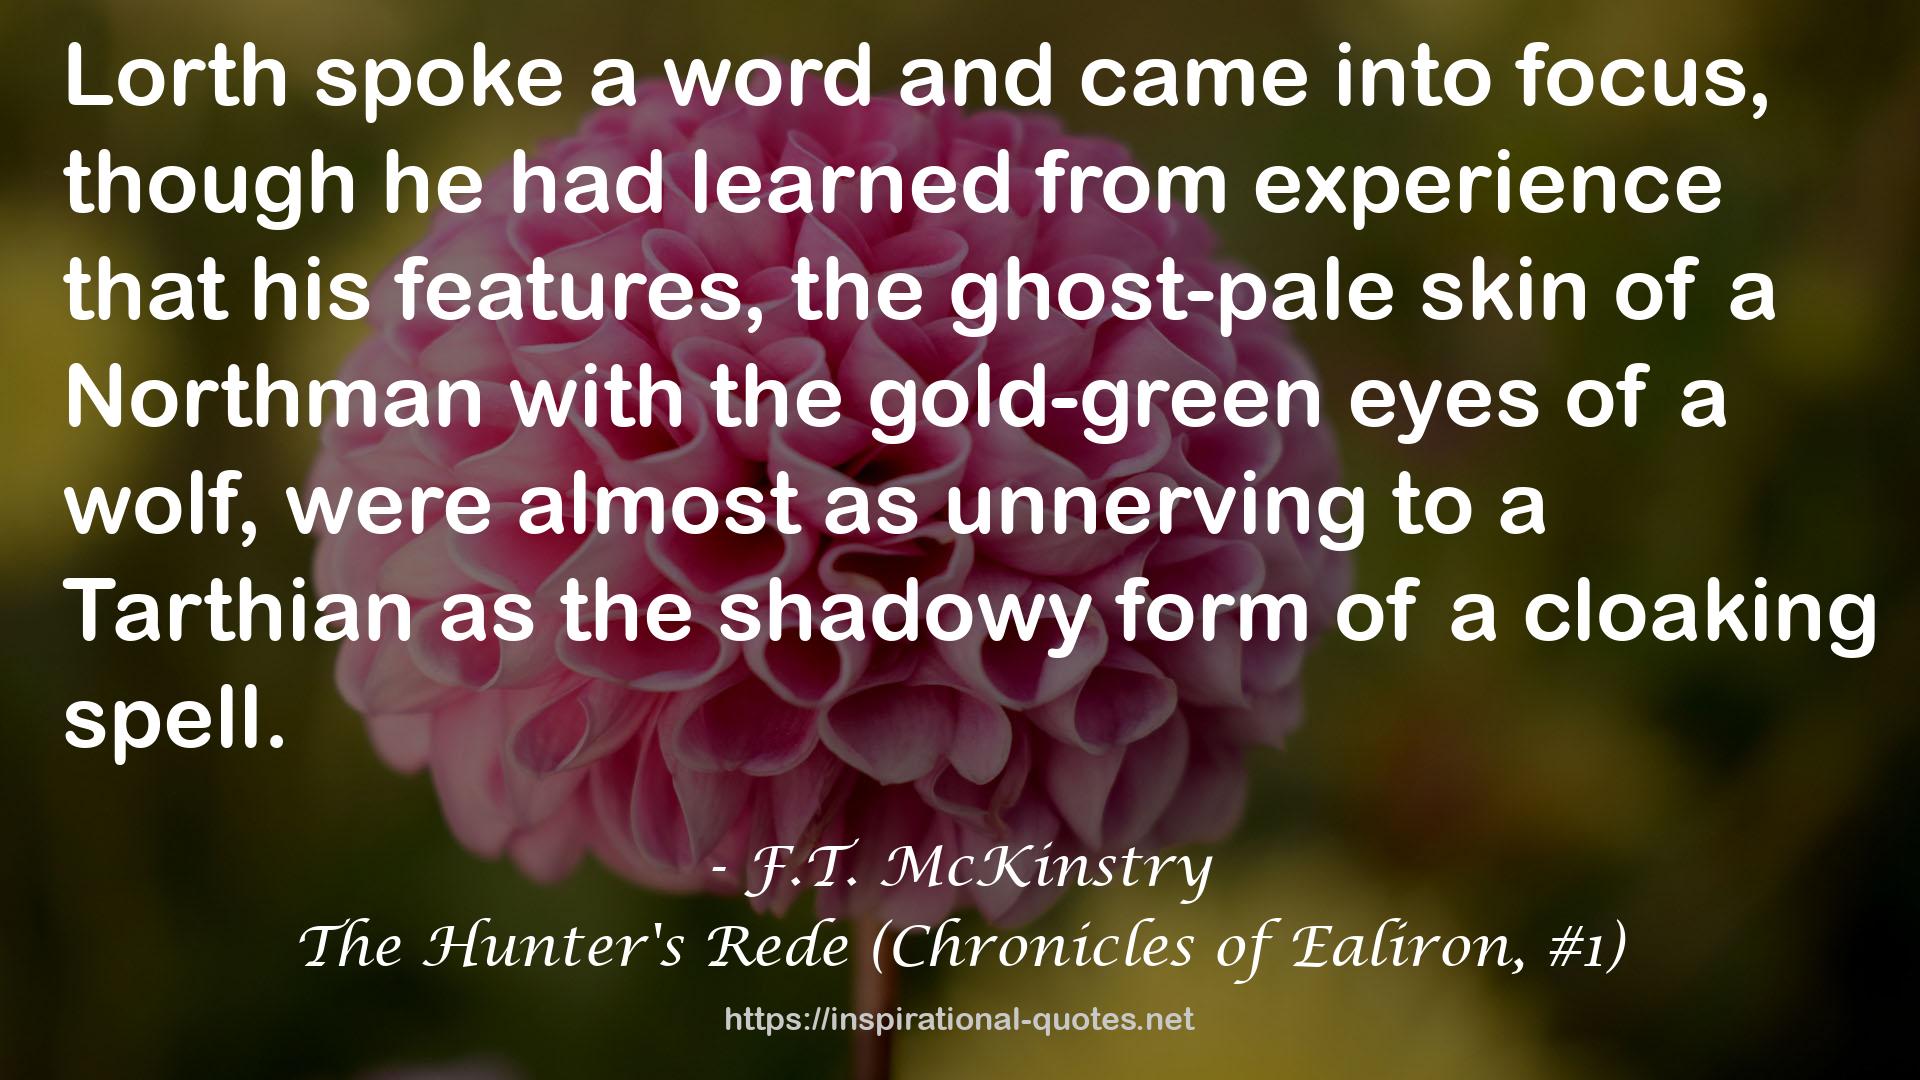 The Hunter's Rede (Chronicles of Ealiron, #1) QUOTES